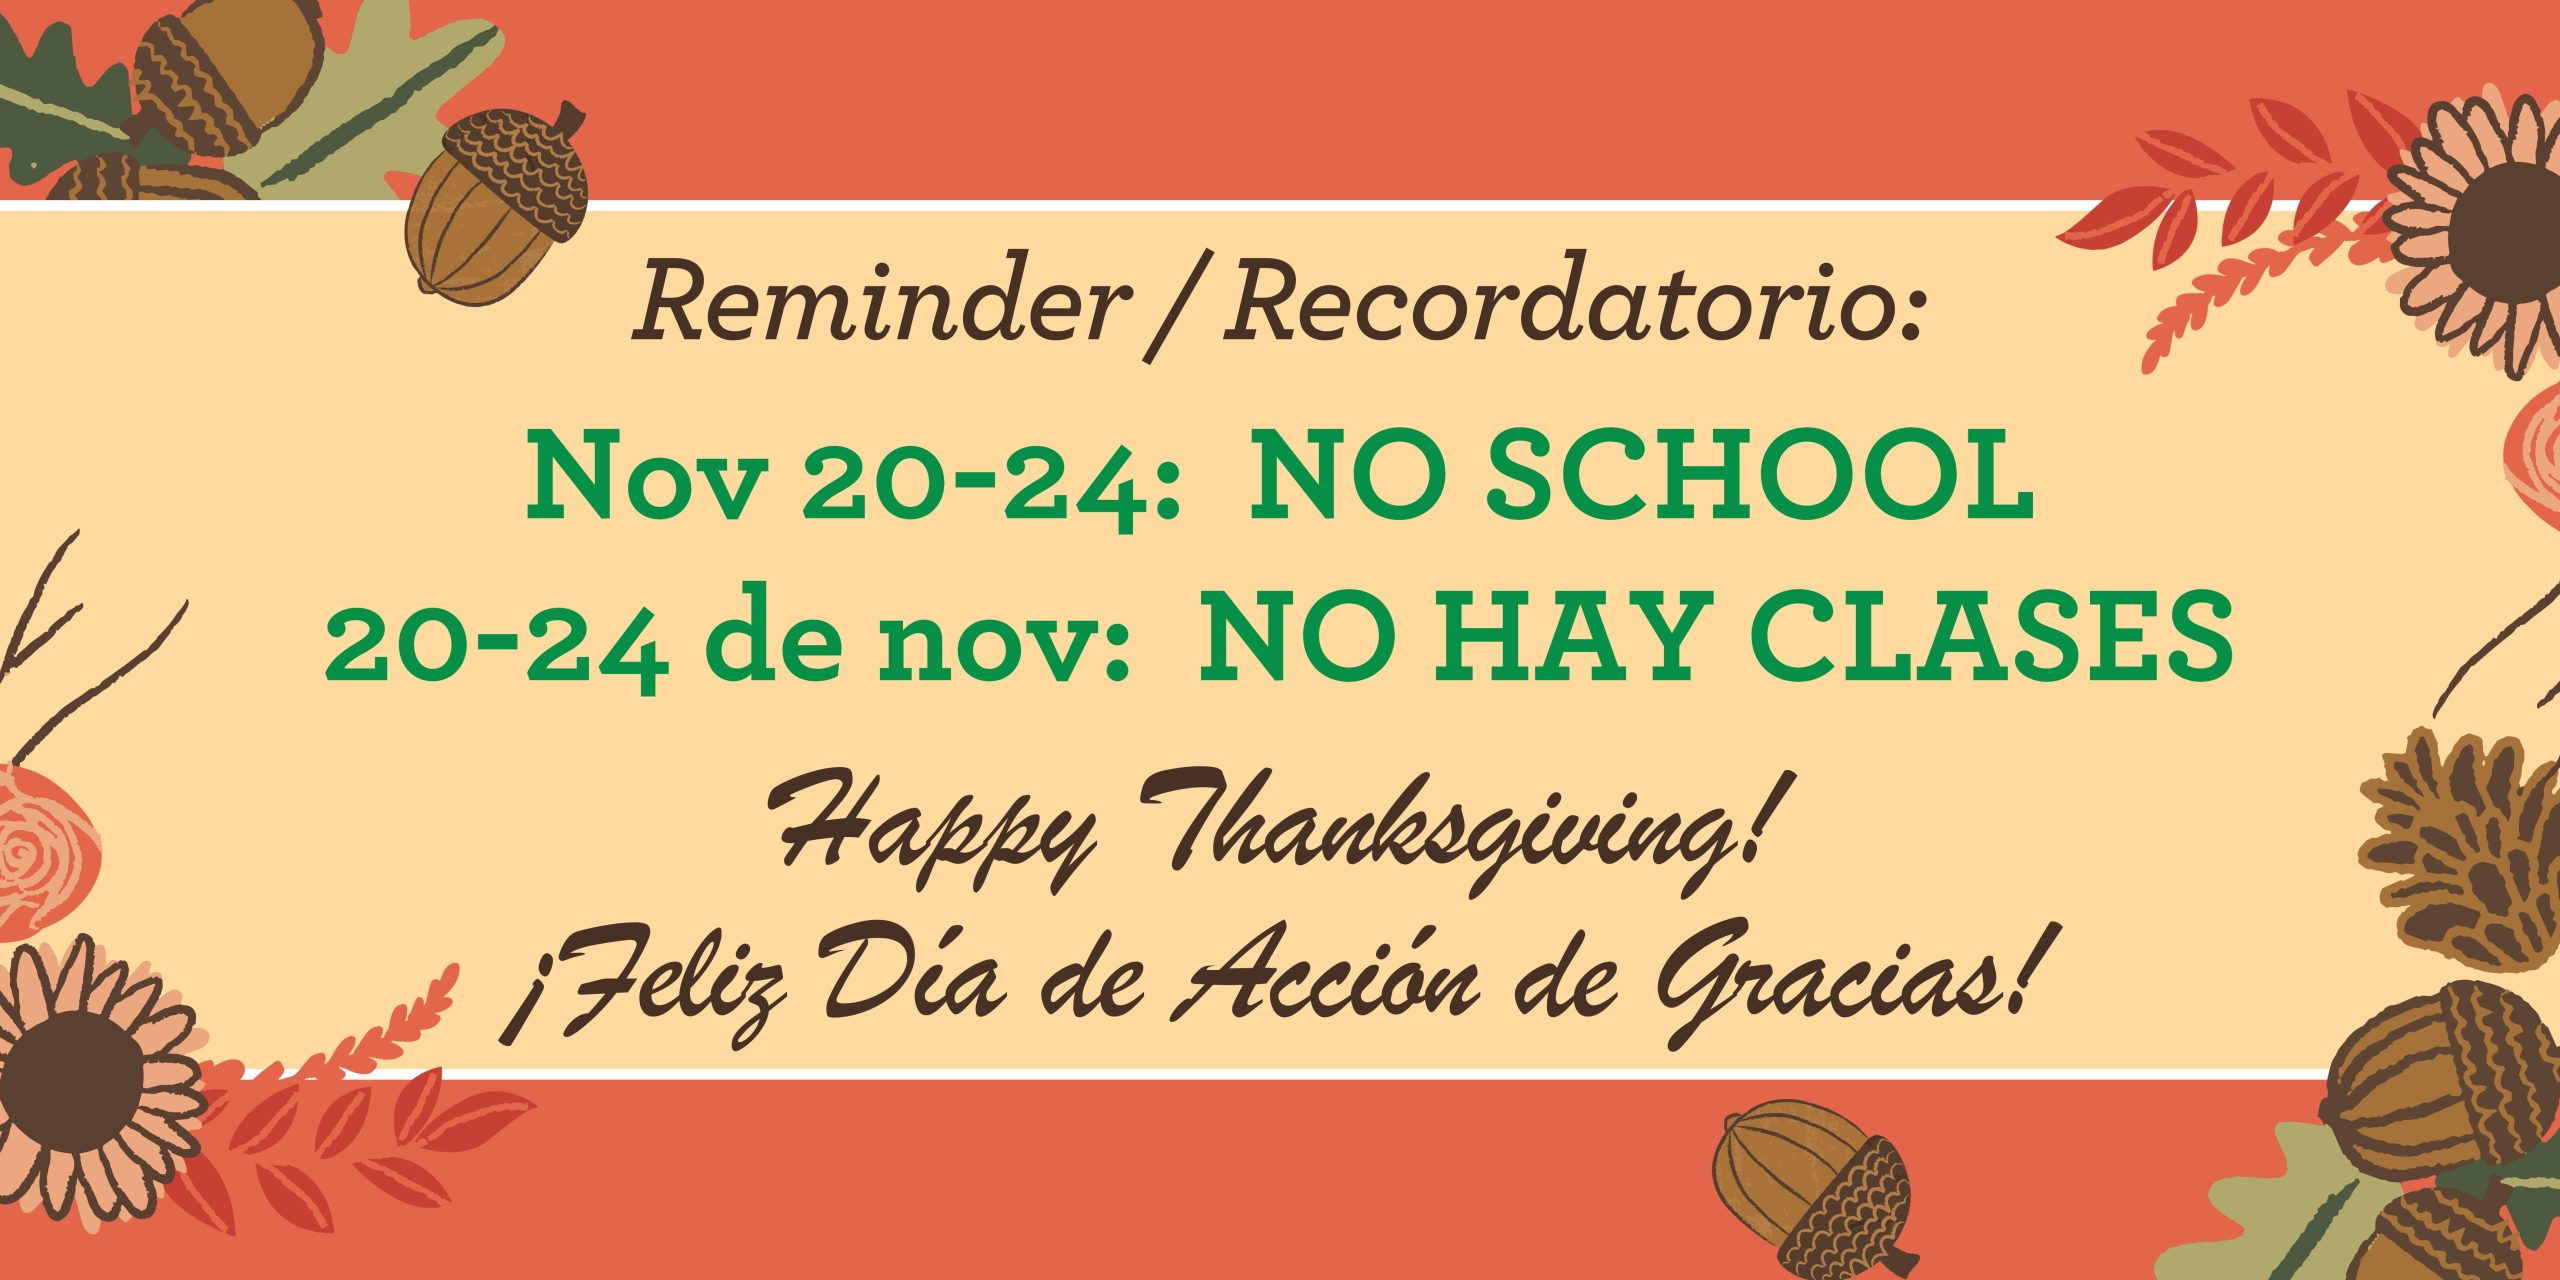 Tan background with orange border at top and bottom with graphics of green and orange fall leaves, brown acorns and yellow sunflowers. Brown text says, "Reminder / Recordatorio:" Green text says, "Nov 20-24: NO SCHOOL" and "20-24 de nov: NO HAY CLASES." Brown text at bottom says, "Happy Thanksgiving! Feliz Día de Acción de Gracias!"